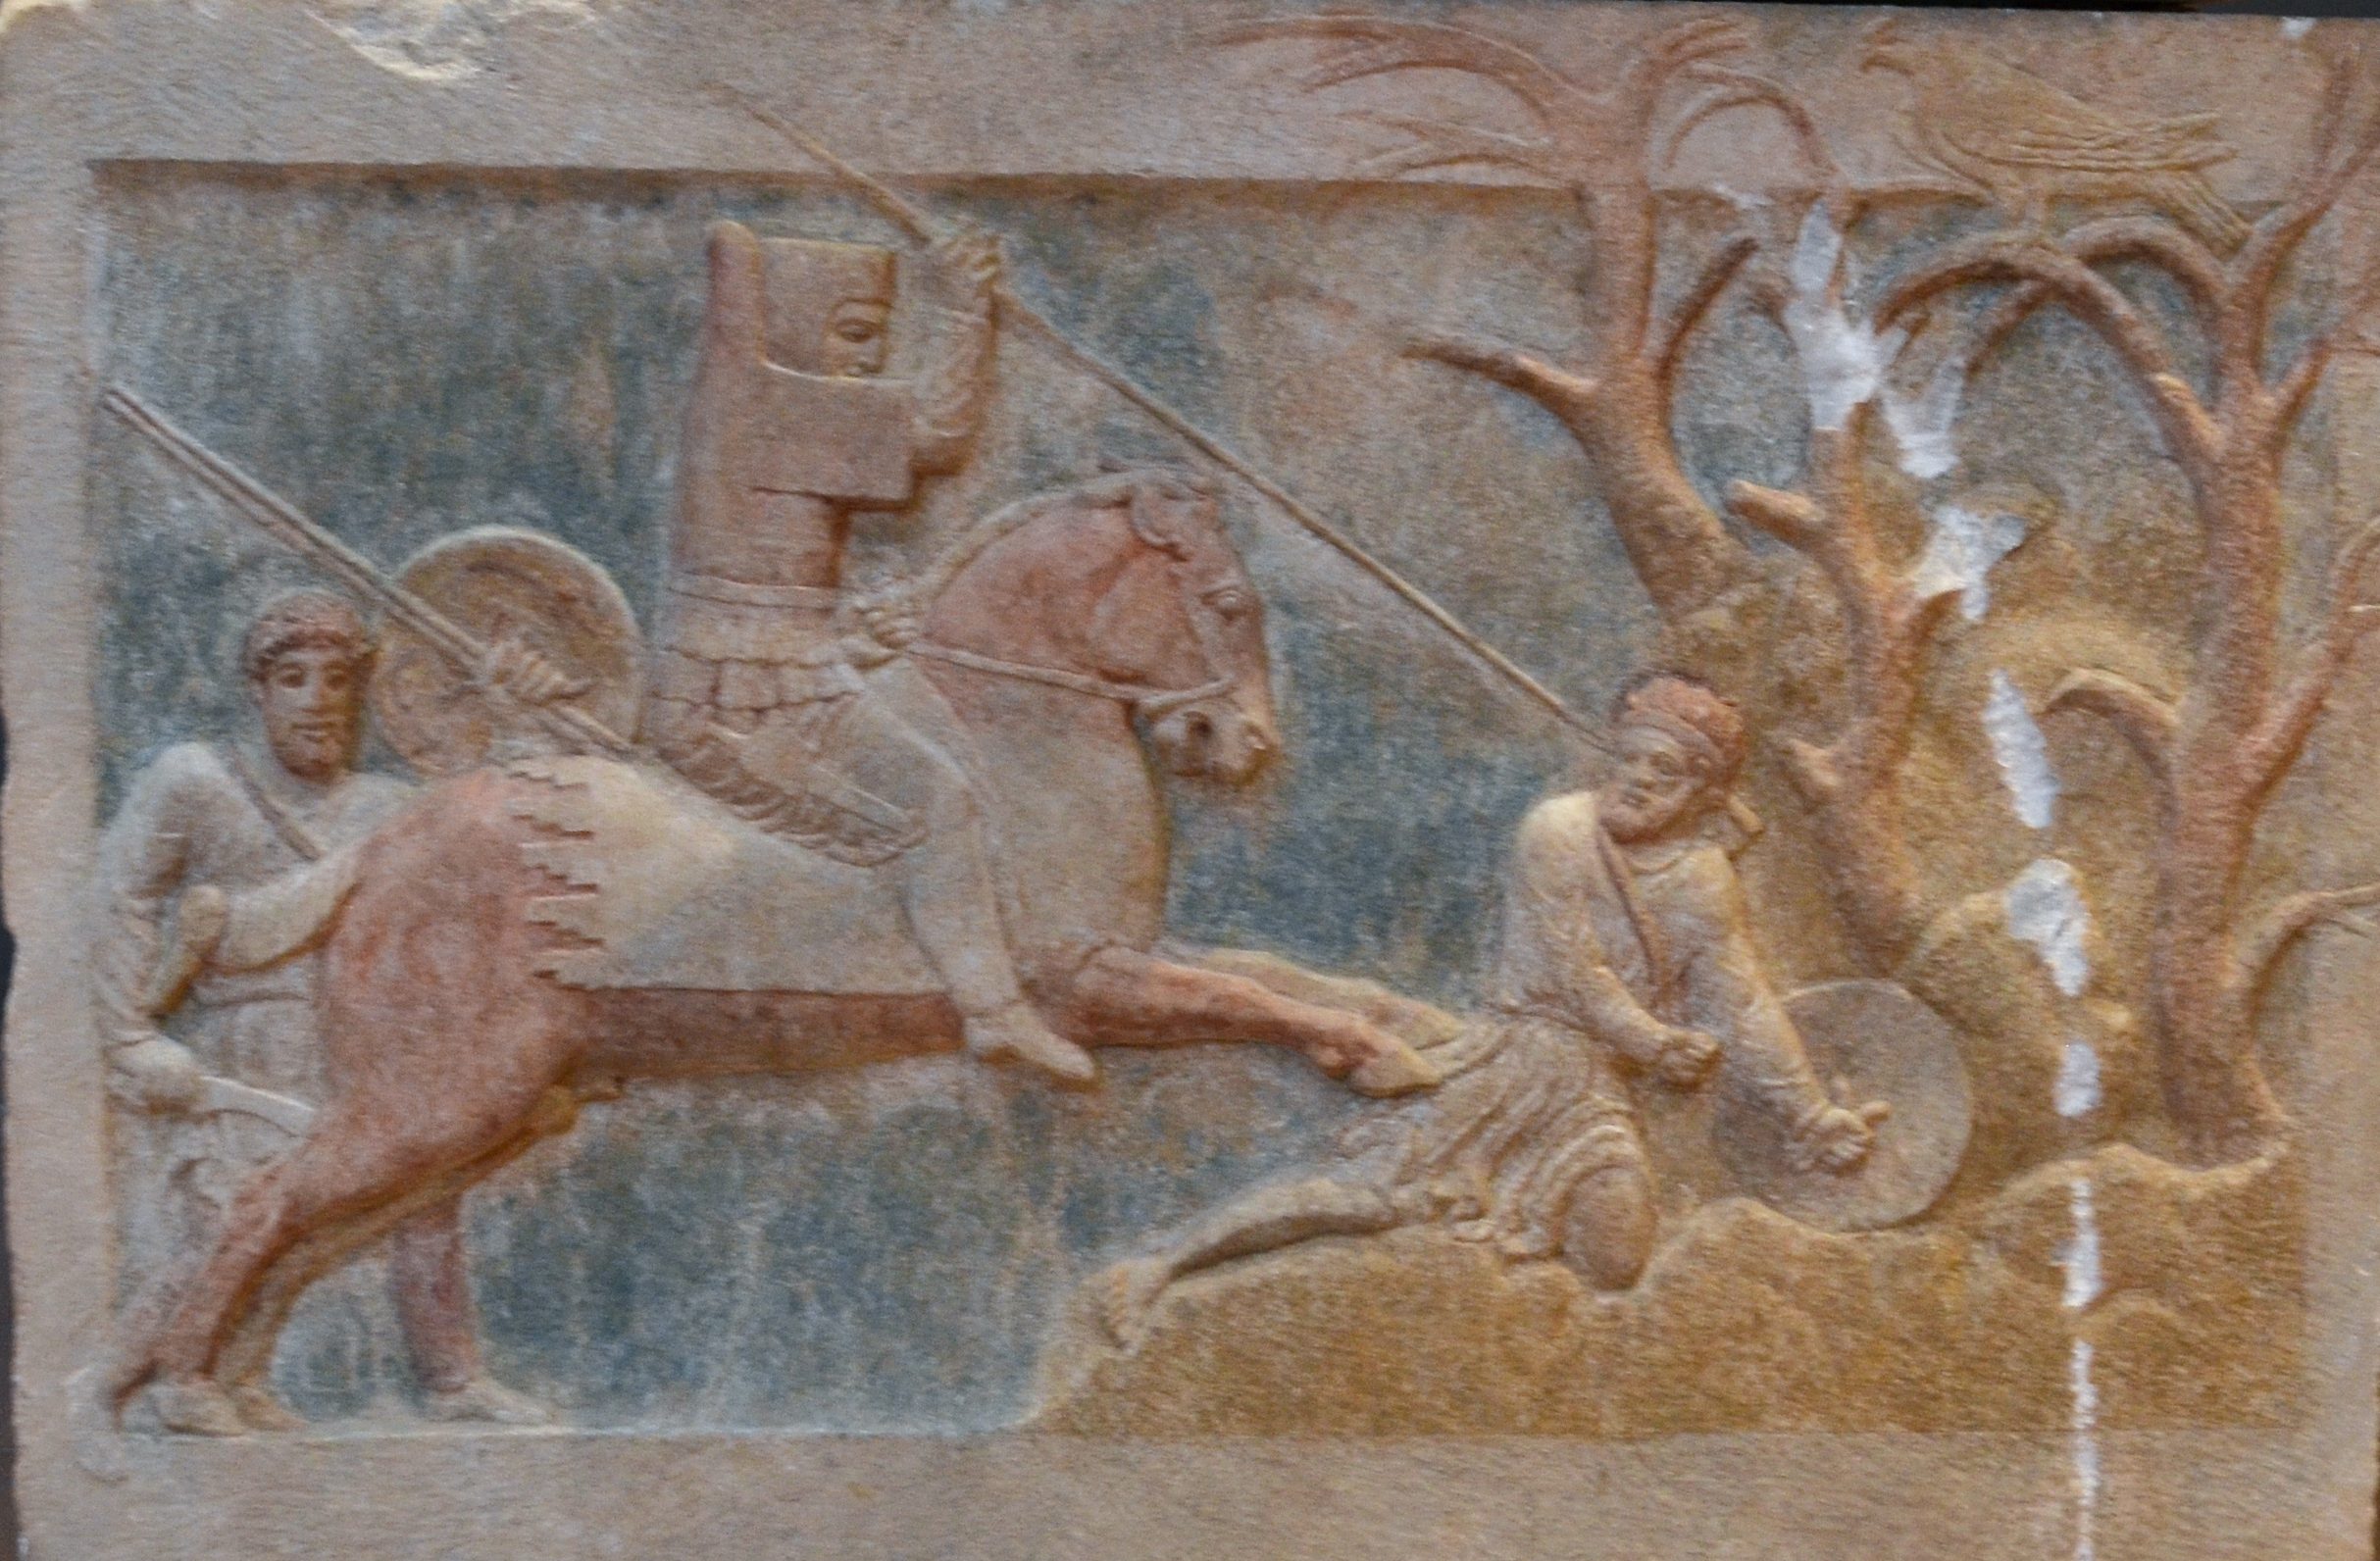 In another part of the Achaemenid empire, a cavalryman in hood and body armour rides down his enemies with a spear.  Cropped from a photo y Dan Diffendale https://www.flickr.com/photos/dandiffendale/10506953106 under a Creative Commons CC BY-NC-SA 2.0 license.